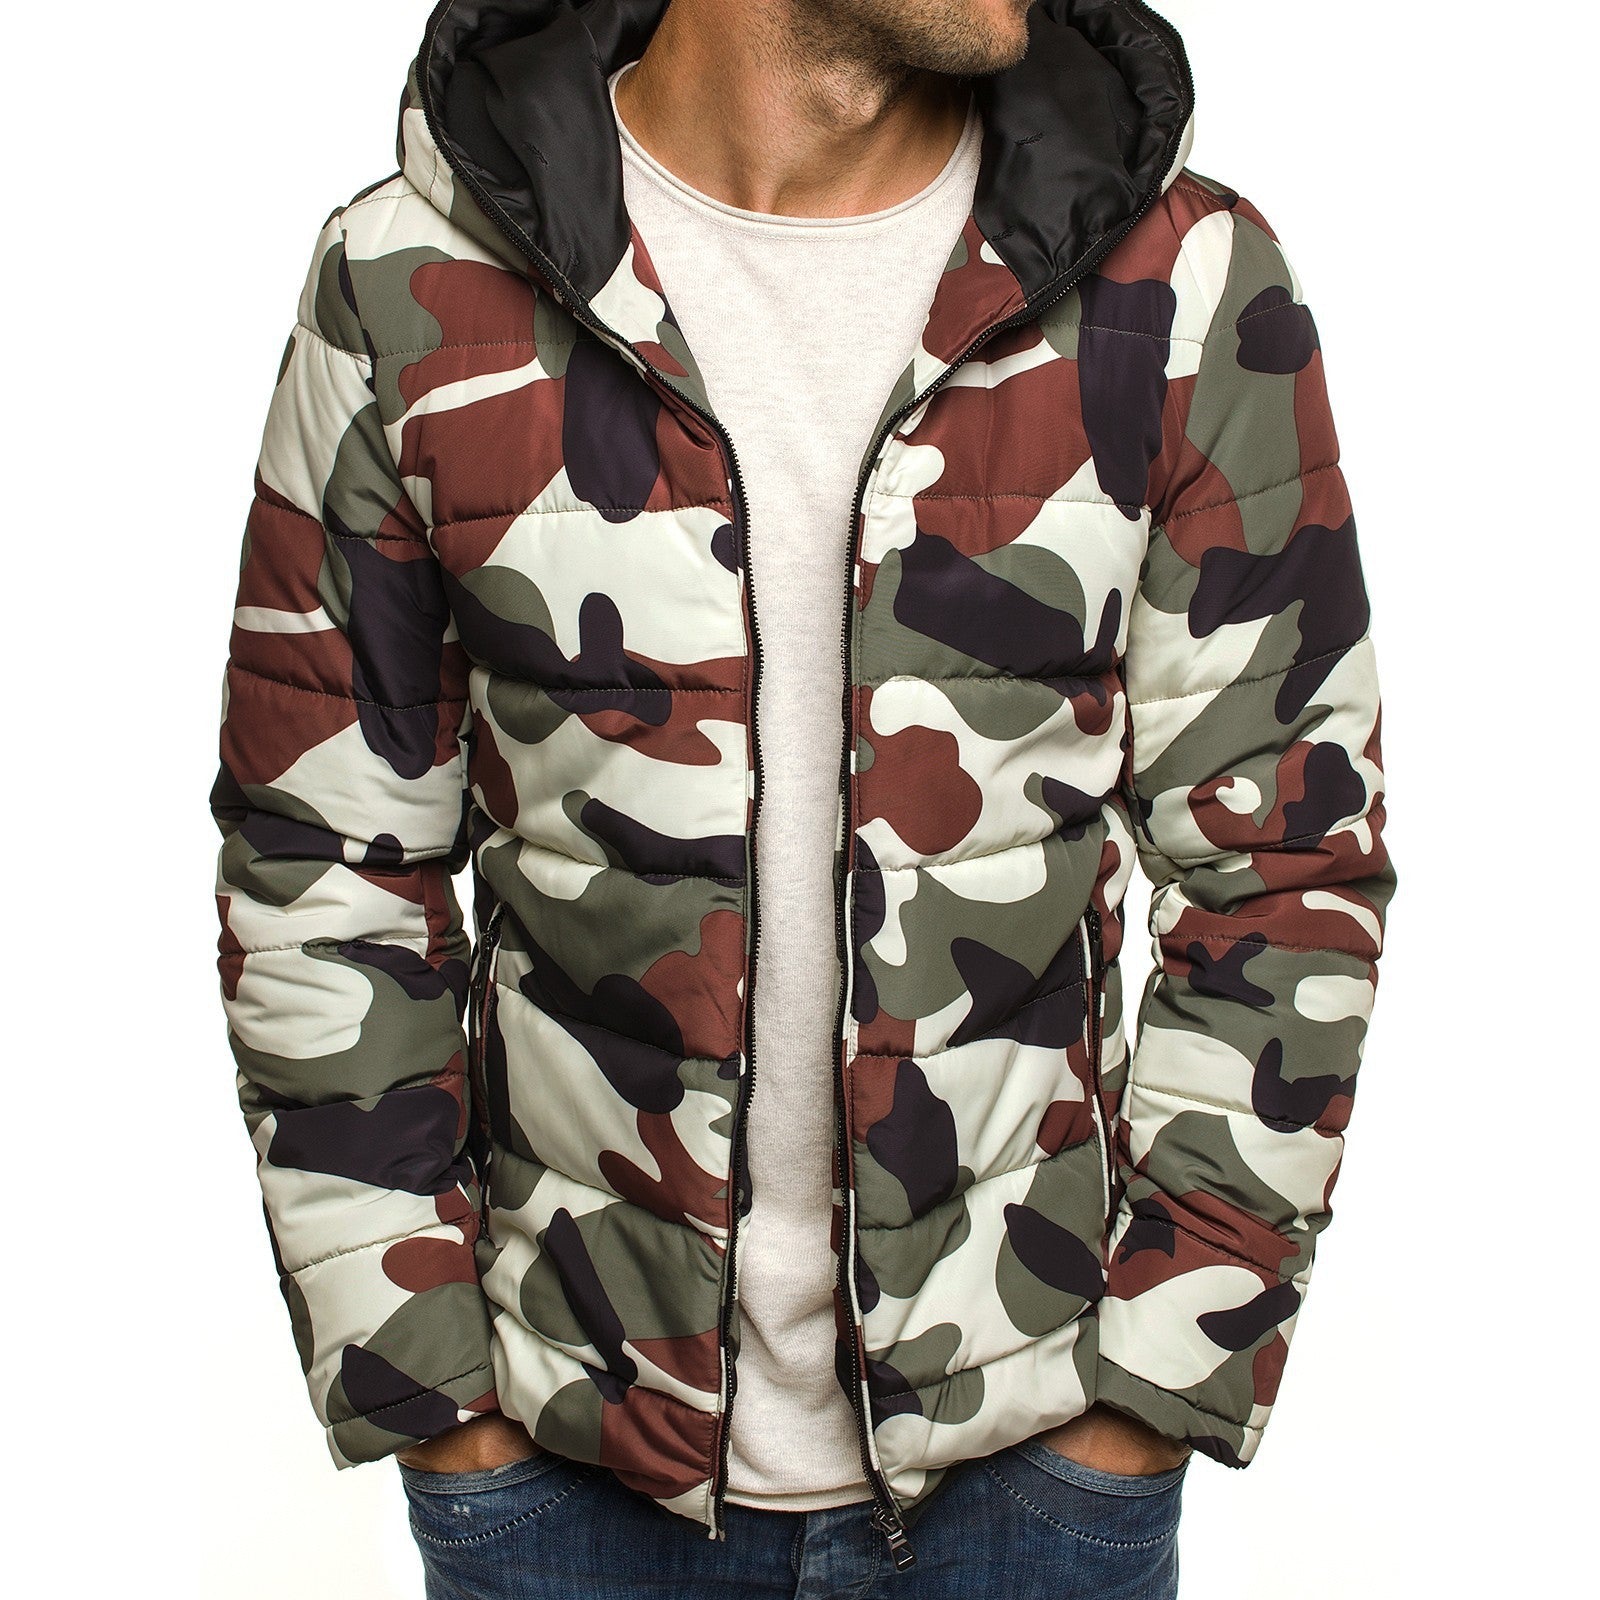  Military Matter Men's Morden Light Weight Camouflage Warm Winter Coat | The Best CS Tactical Clothing Store